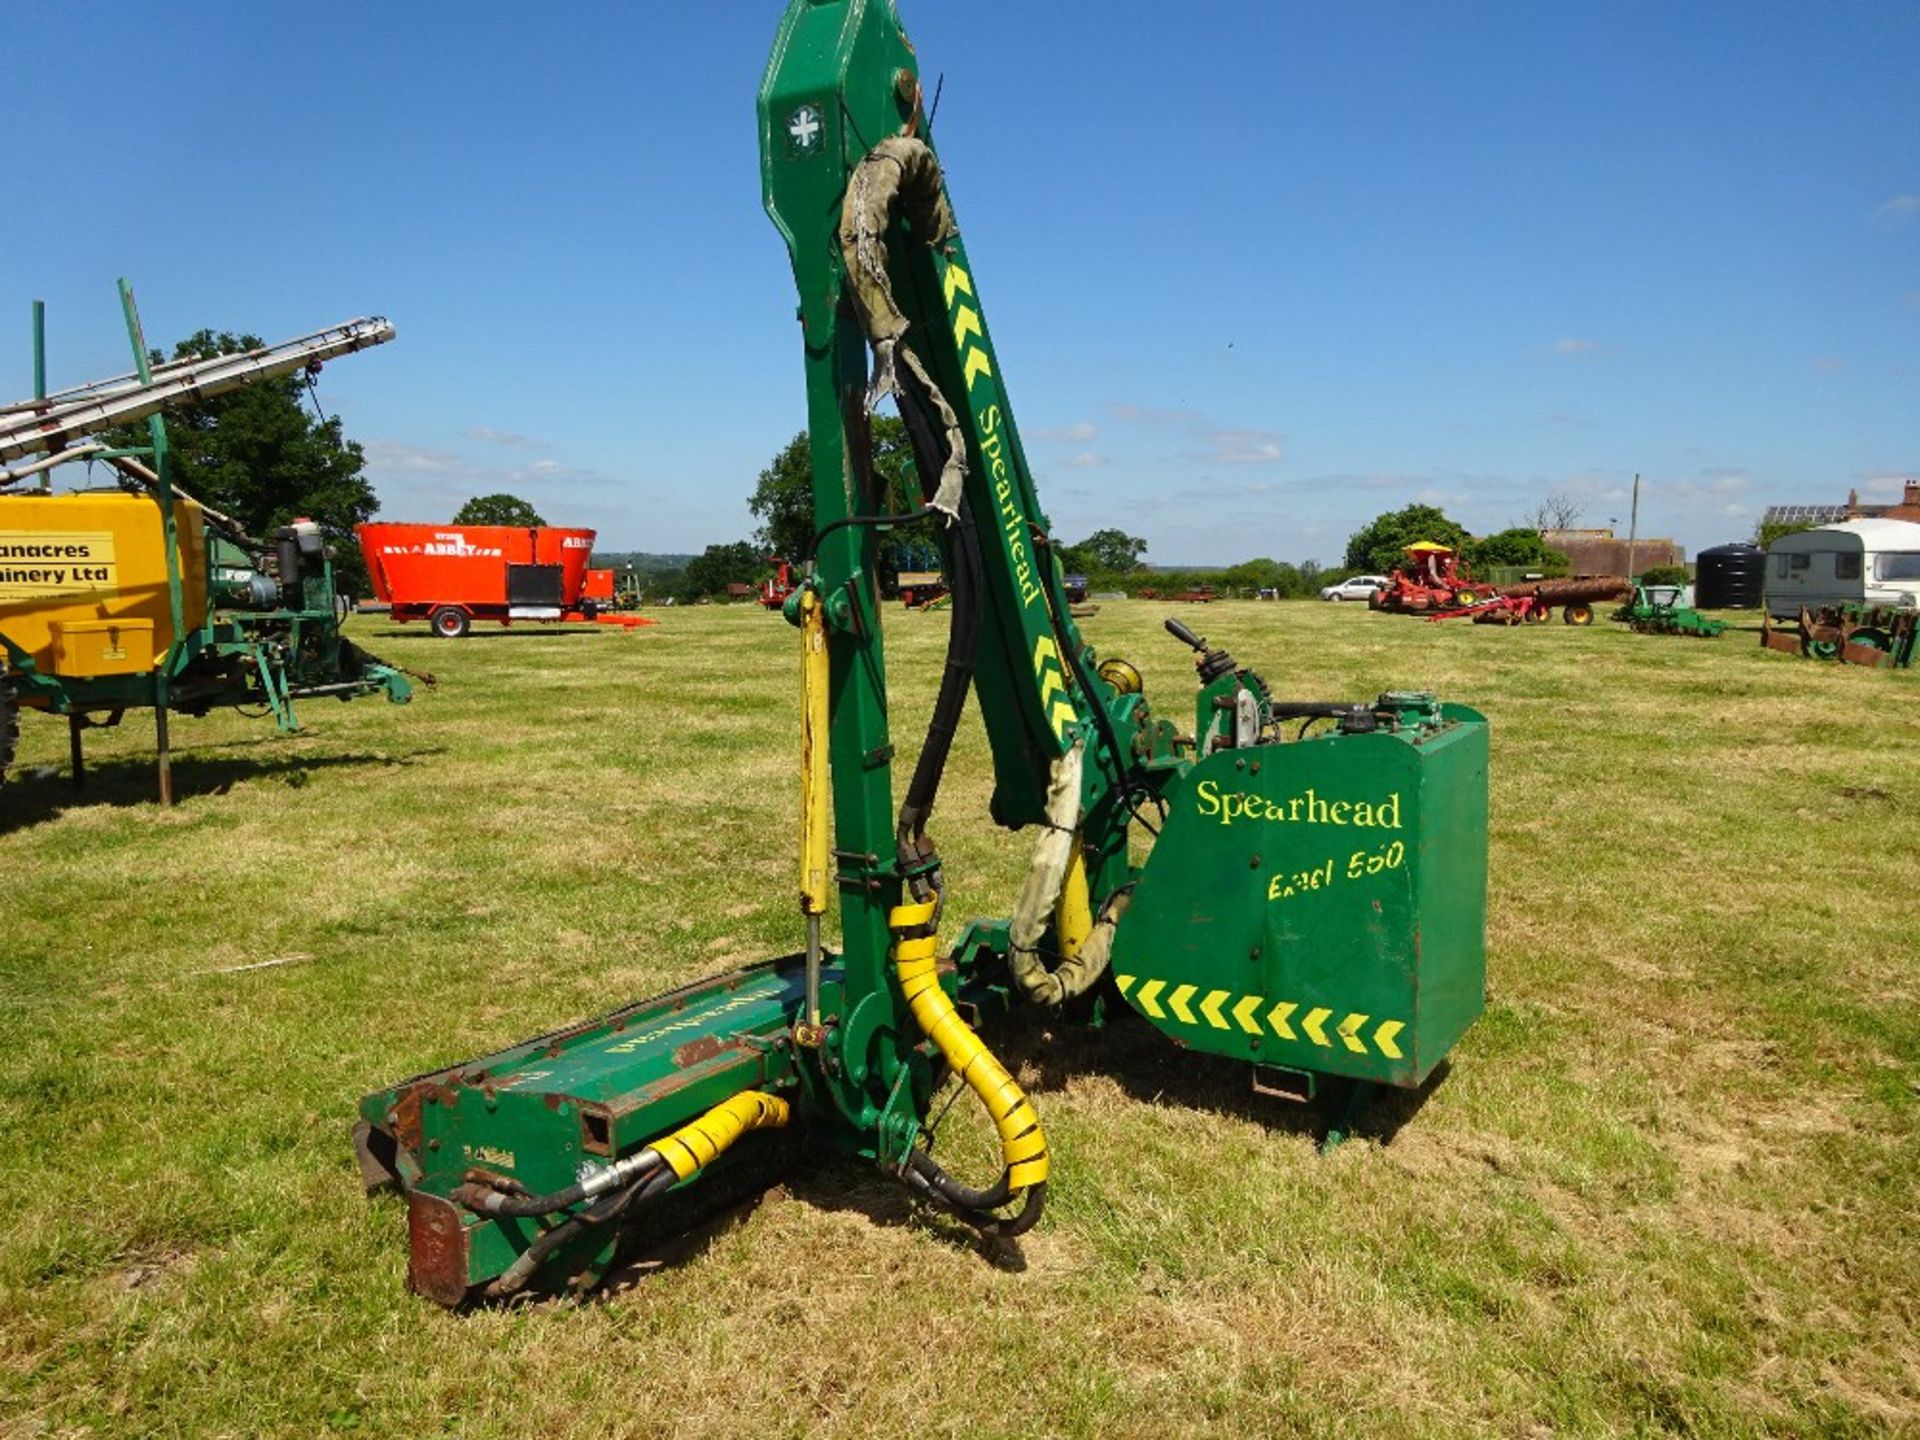 SPEARHEAD EXEL 550 HEDGECUTTER - Image 5 of 5